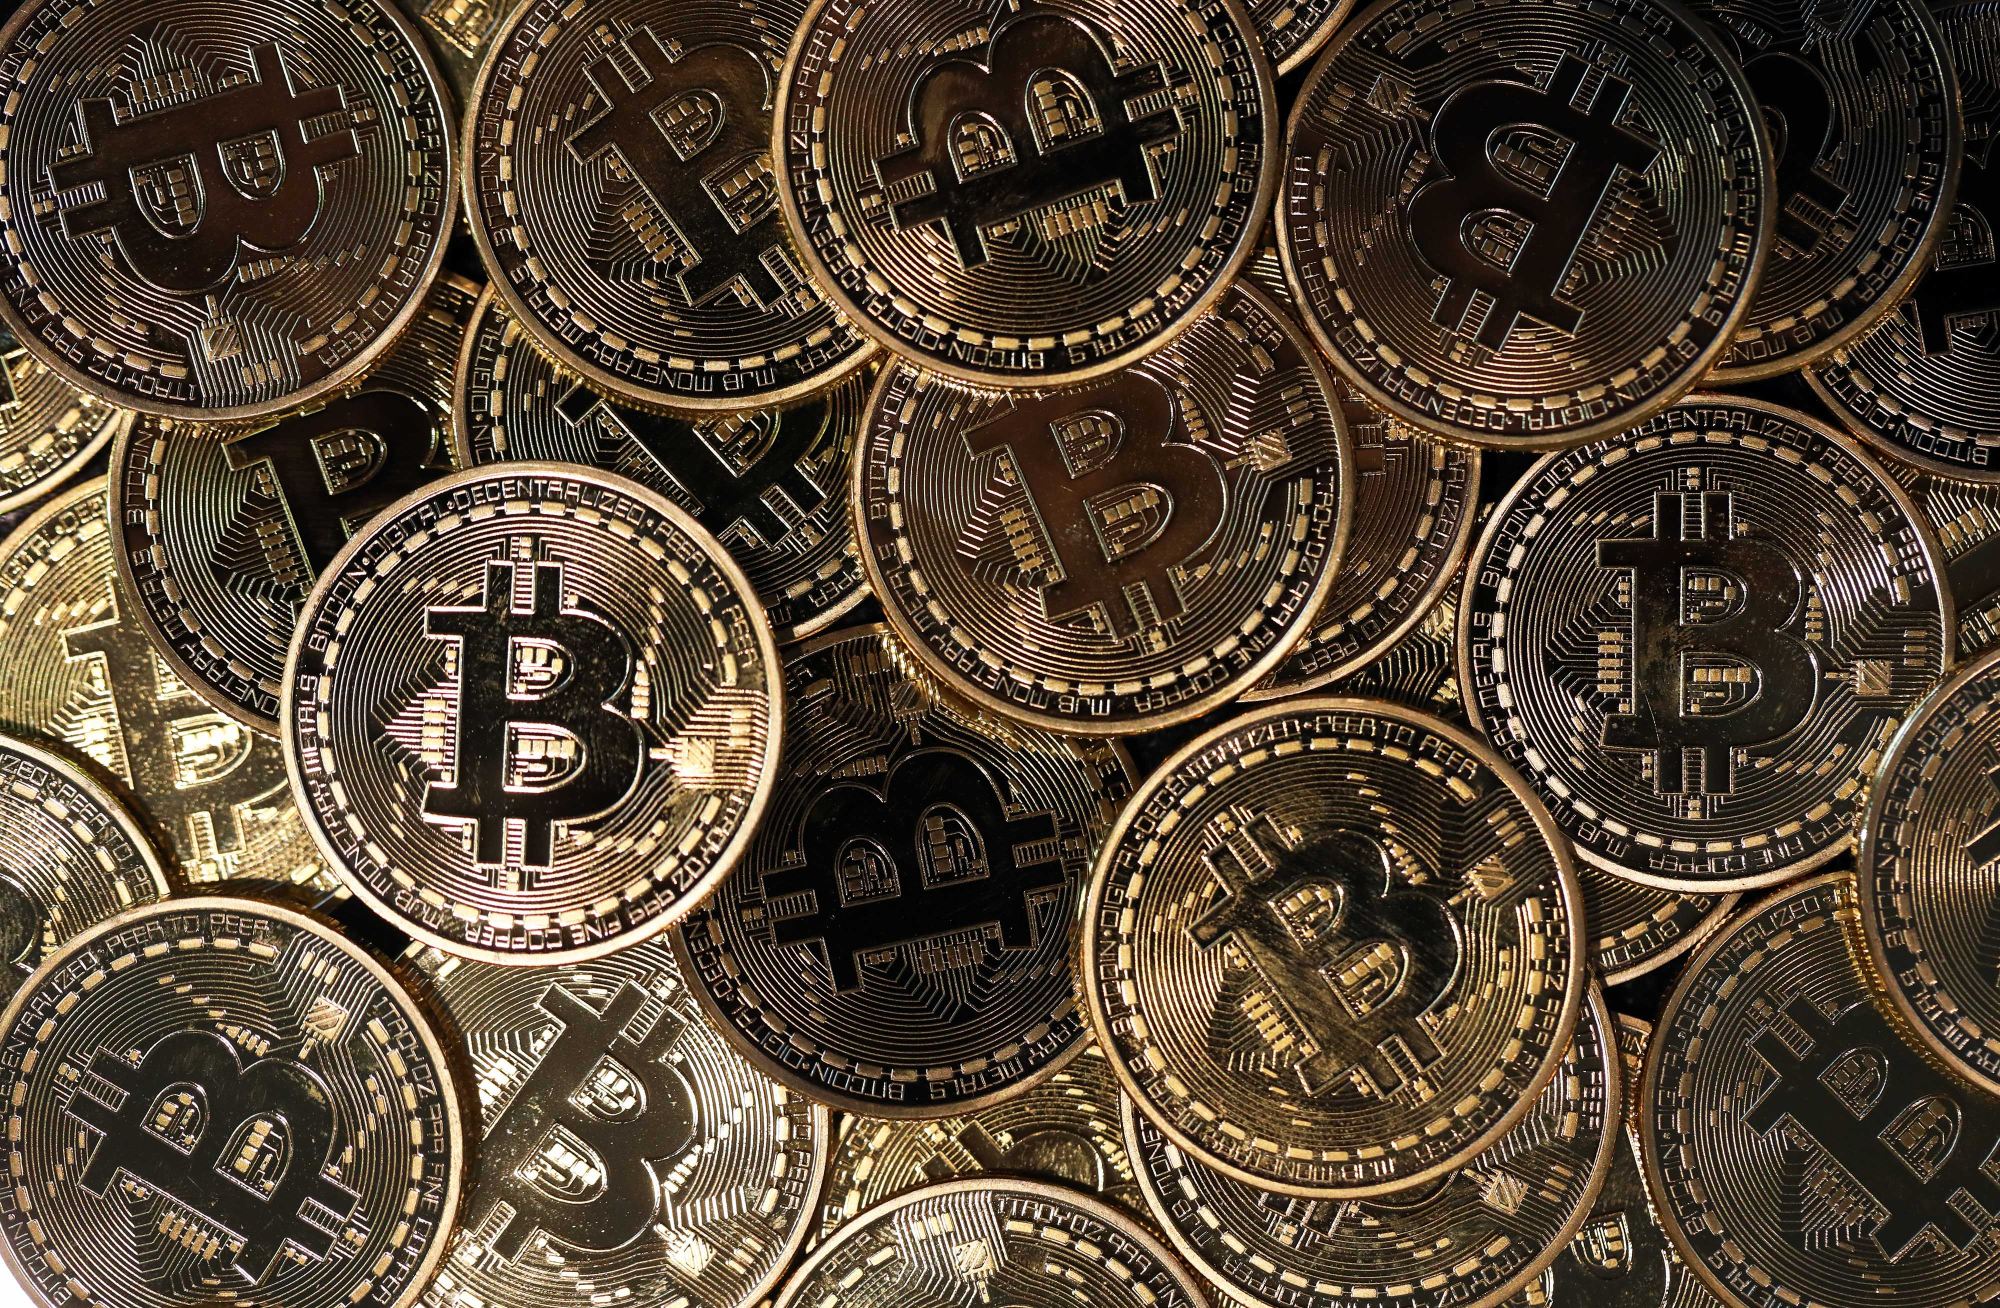 Bitcoins As Cryptocurrency Halts Decline After Drubbing on China's Offerings Ban